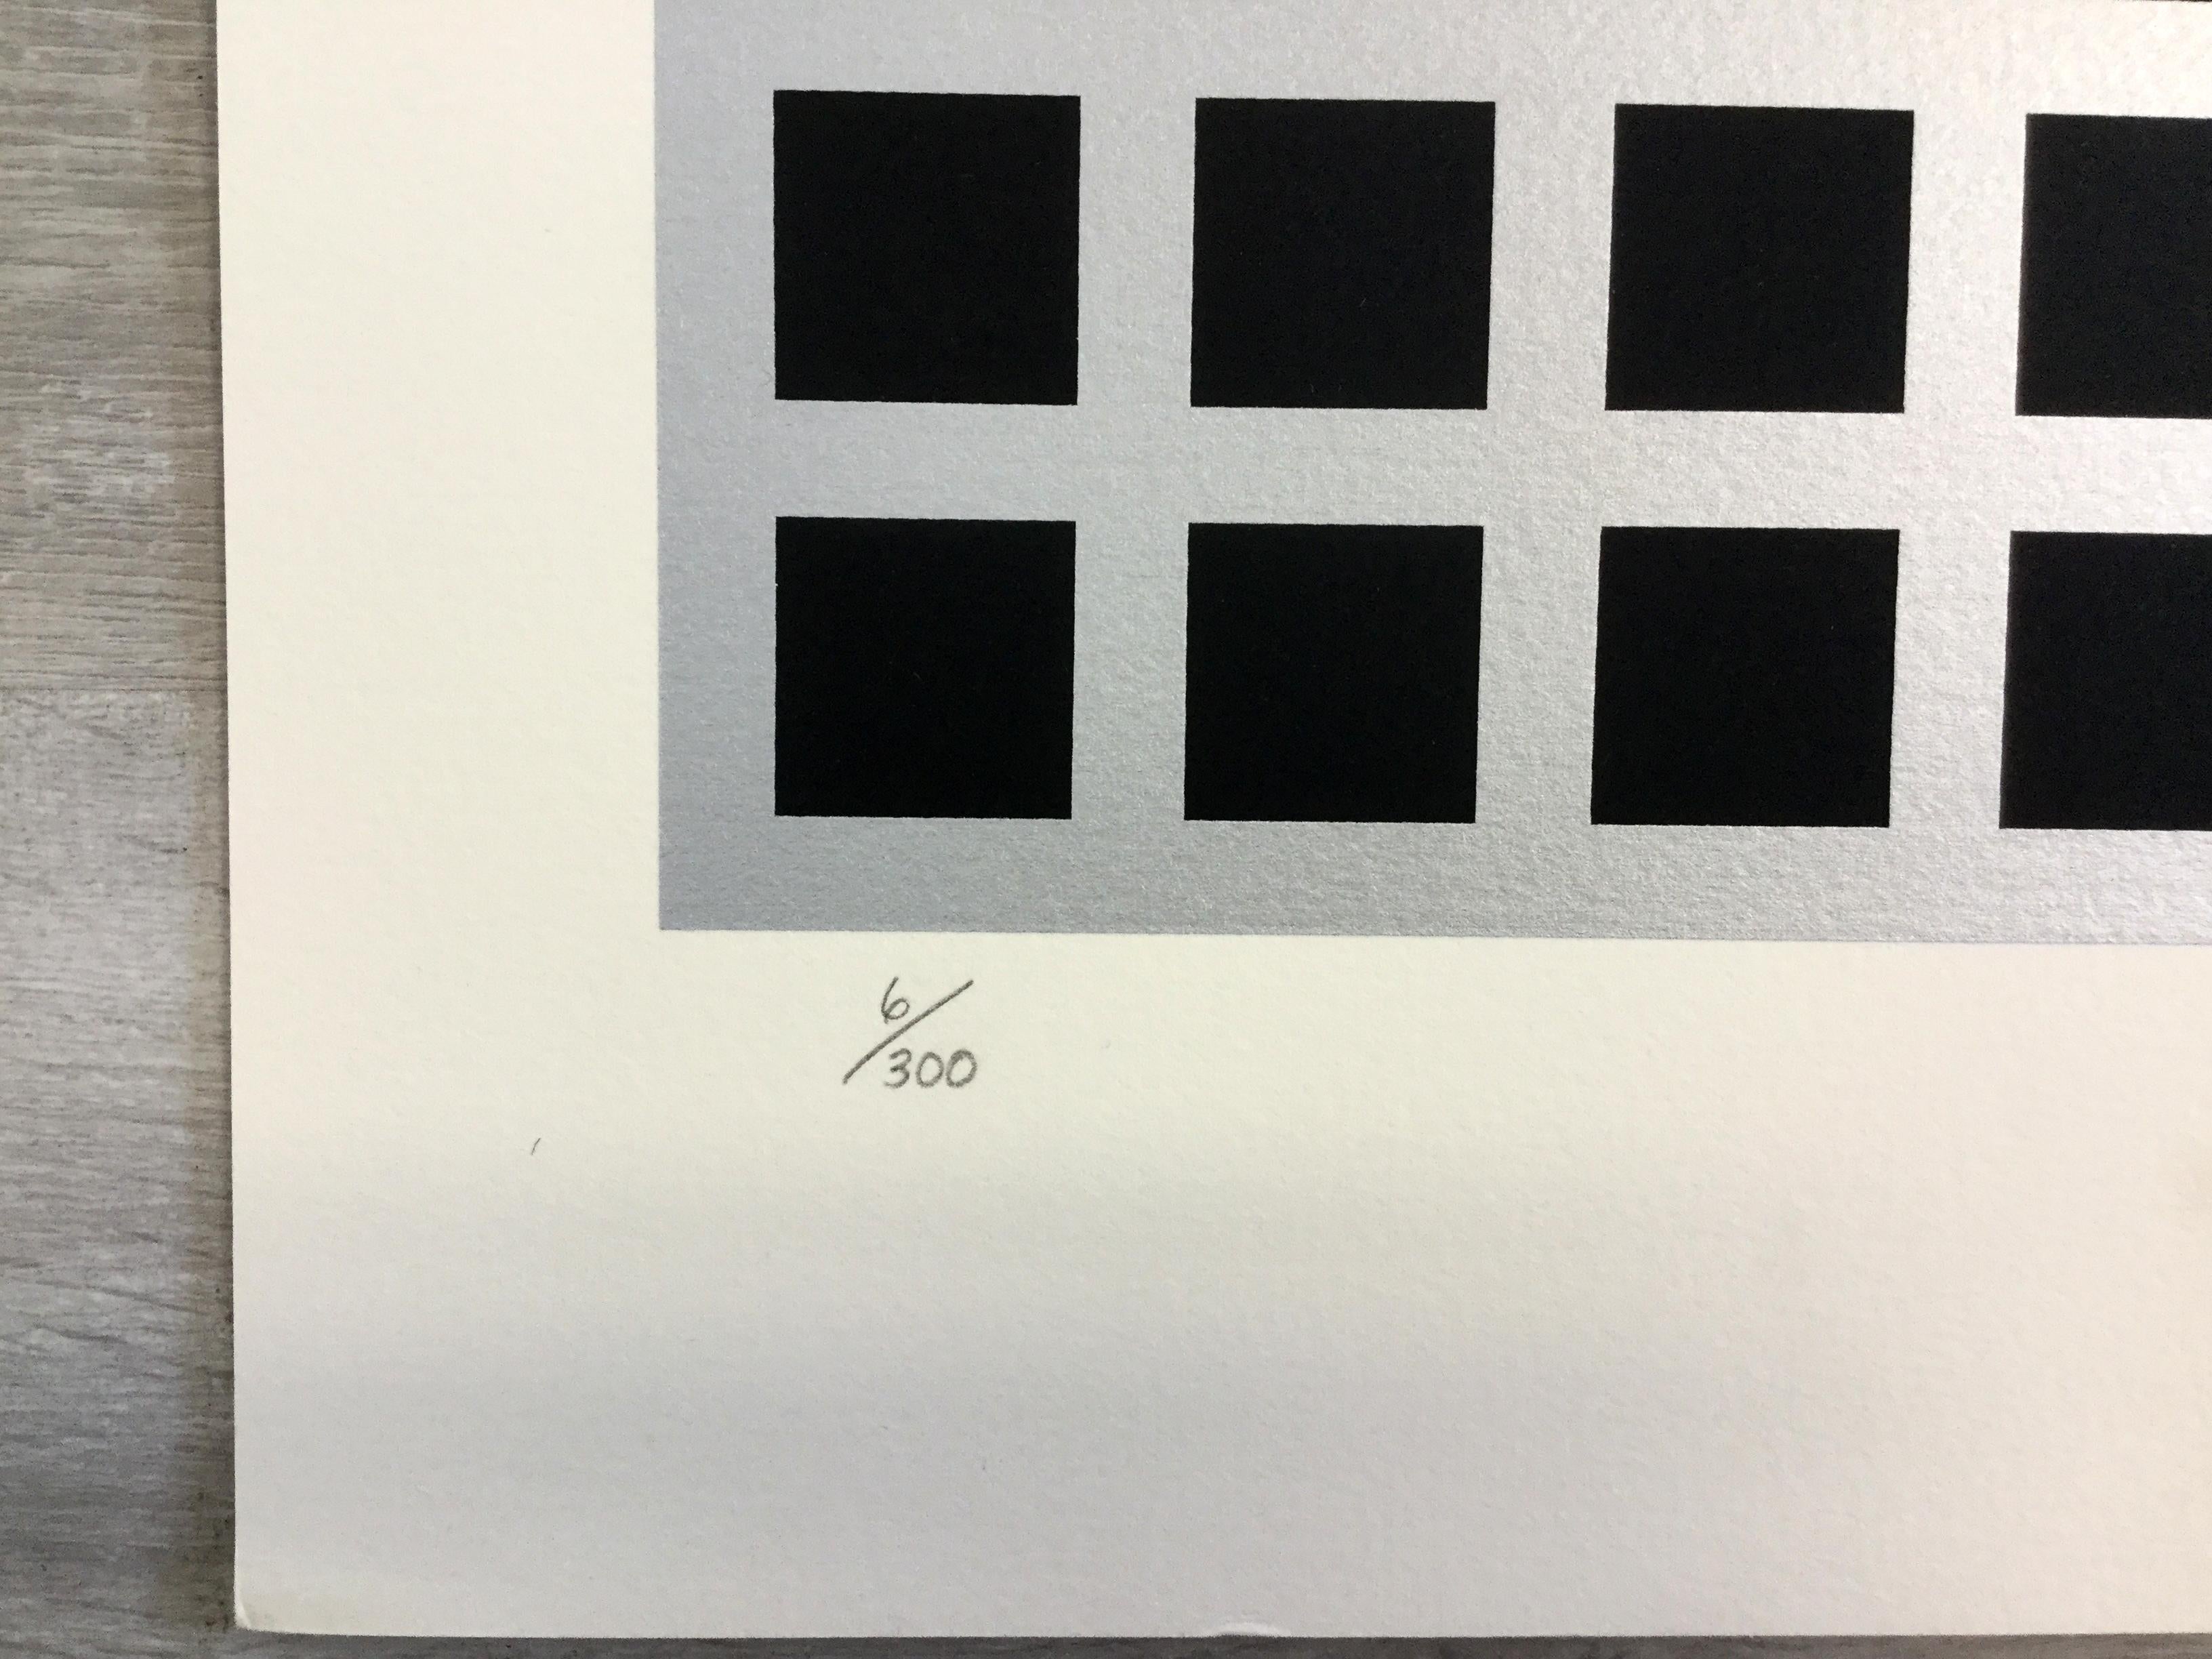 For your consideration is an eye-catching, hand signed lithograph by Victor Vasarely, the leader of the Op-art Movement. Size is 29